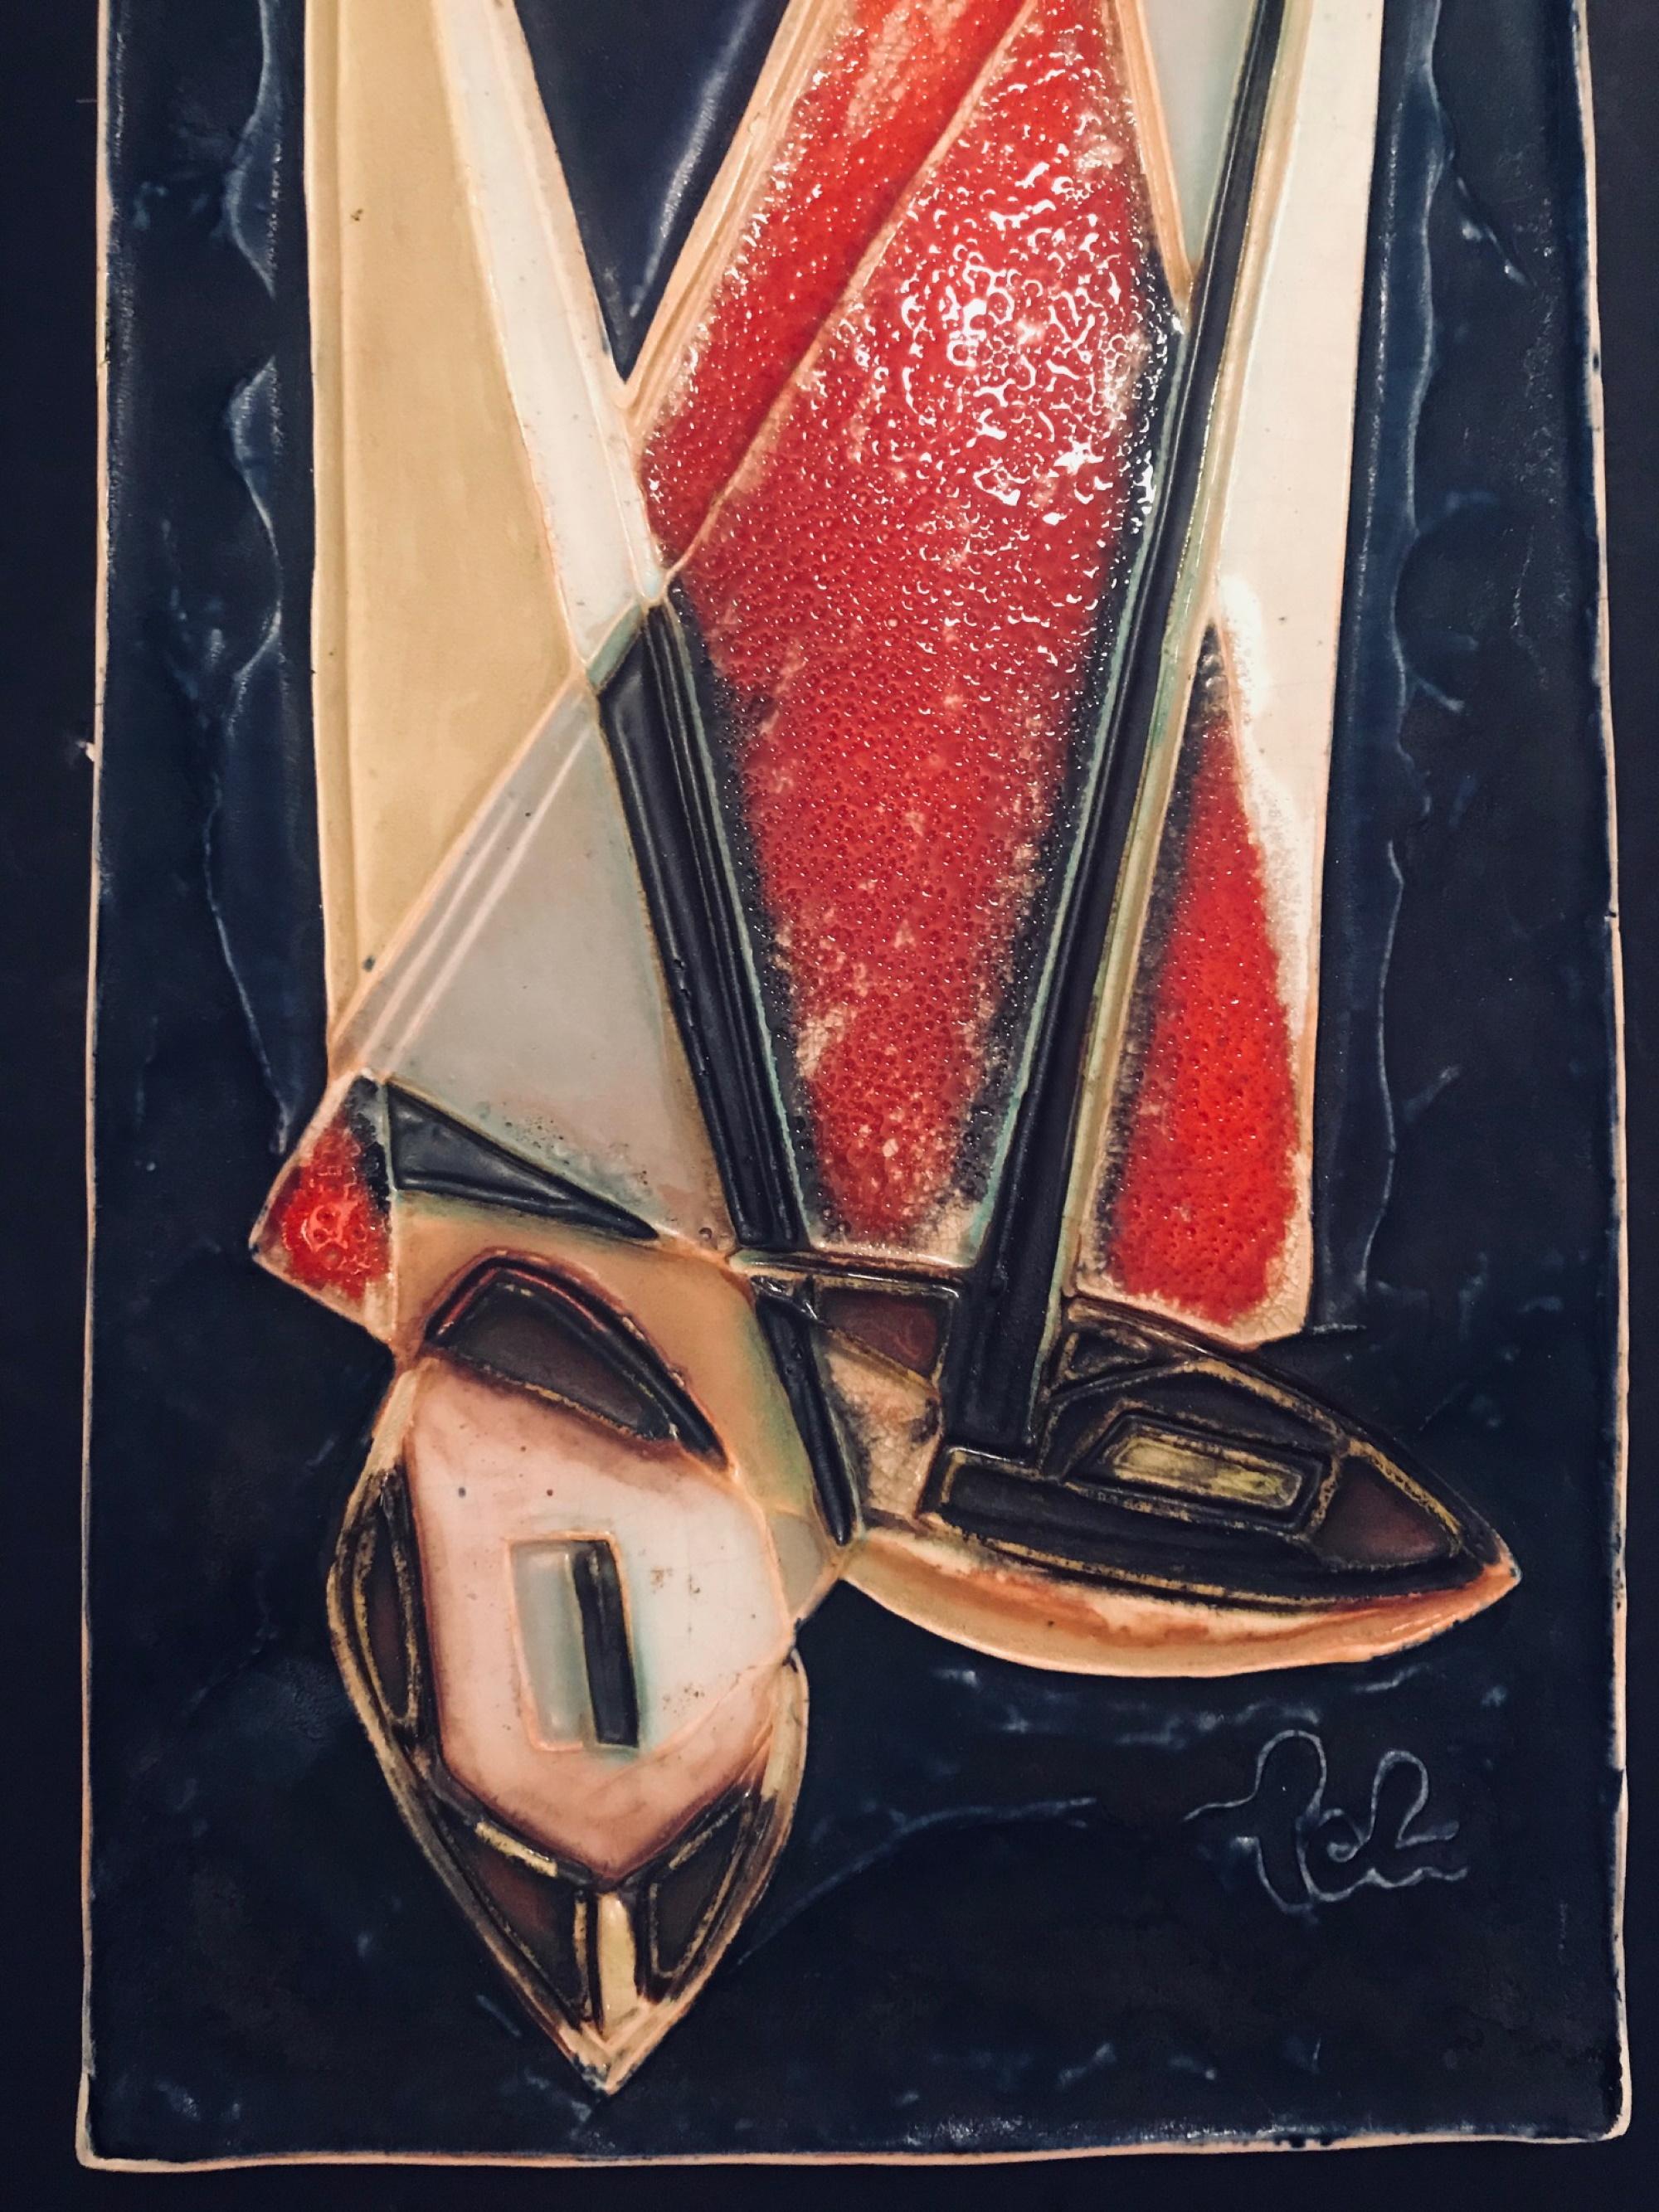 Mid-Century Modern large relief tile handmade fat lava Helmut Schaffenacker ceramic wall plaque sail boats colorful abstract West German art.

Wonderful and colorful midcentury matte glazed tile from the 1950s by renowned Modernist German sculptor,